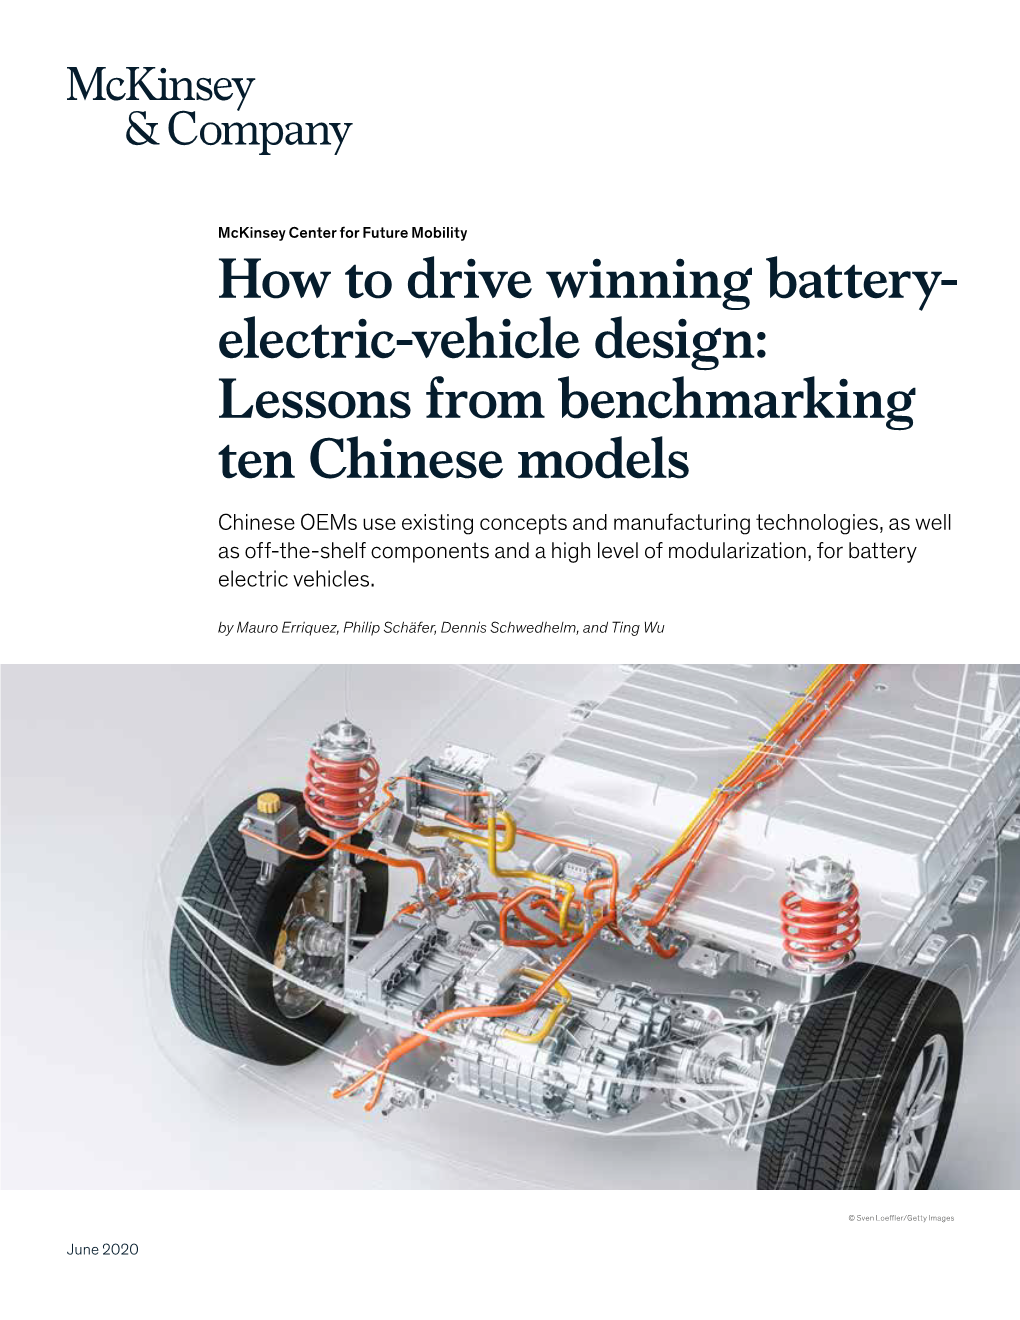 How to Drive Winning Battery-Electric-Vehicle